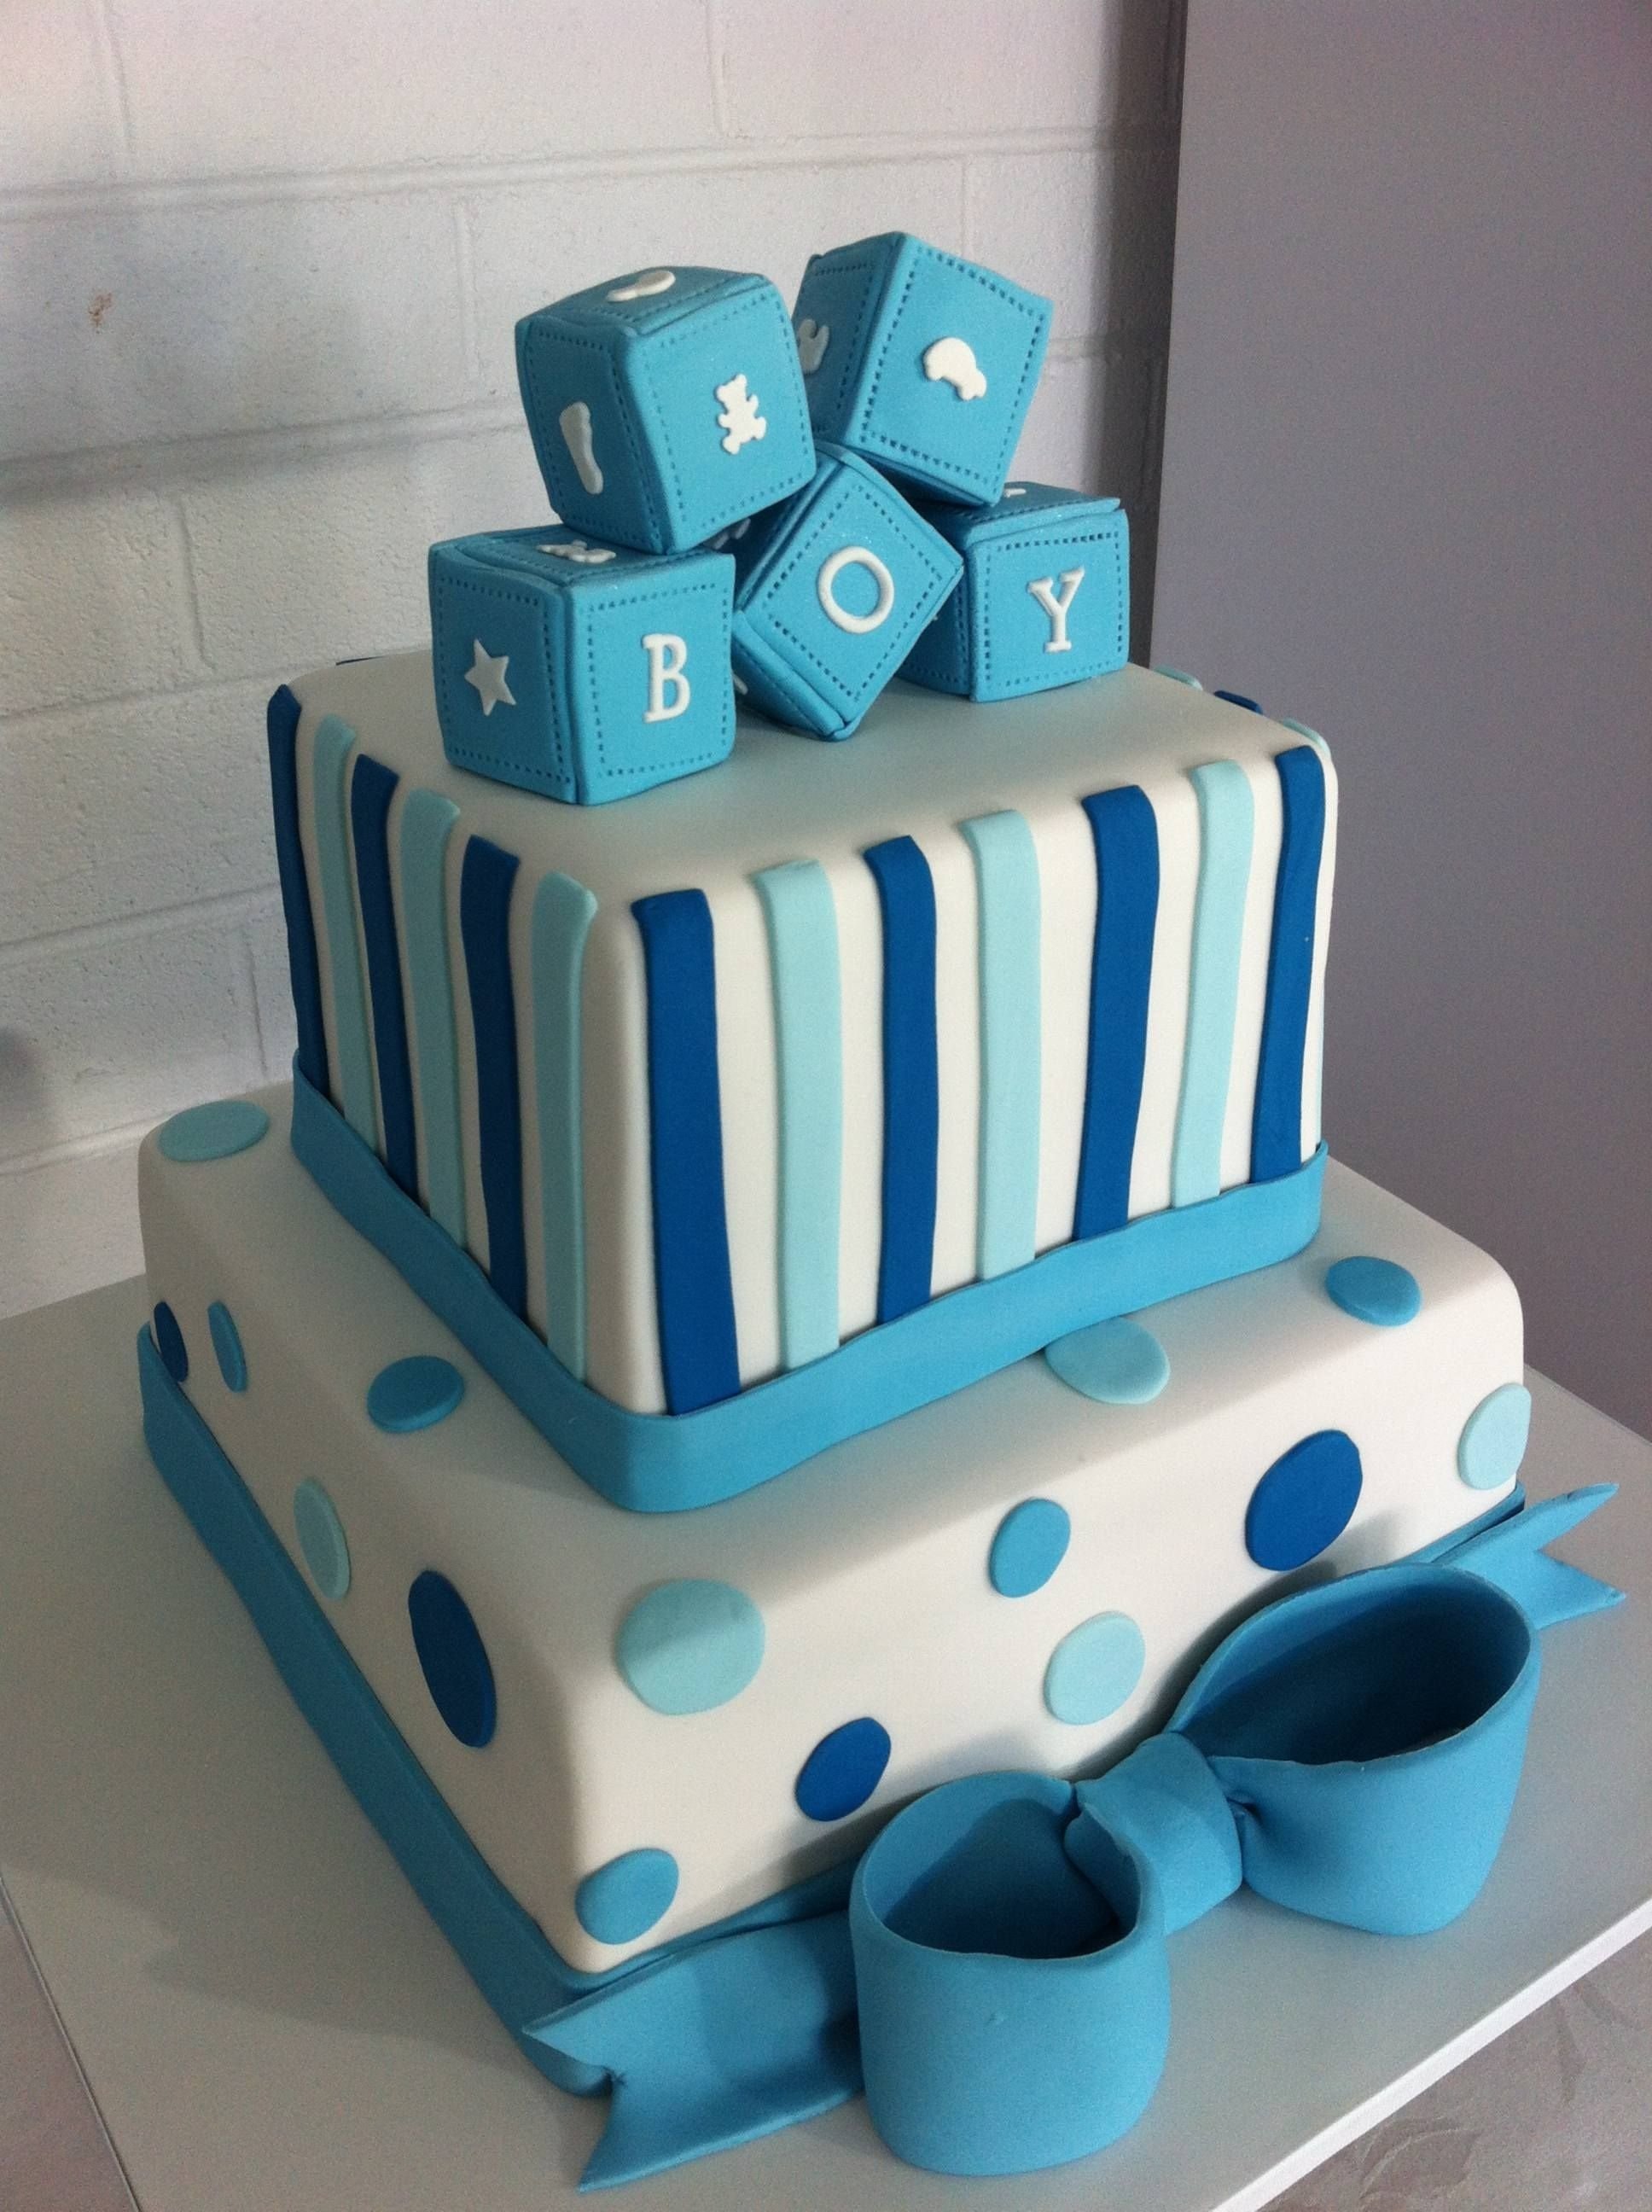 10 Pretty Boy Baby Shower Cake Ideas boy baby shower cakes cakesdesign our new creations other 9 2022